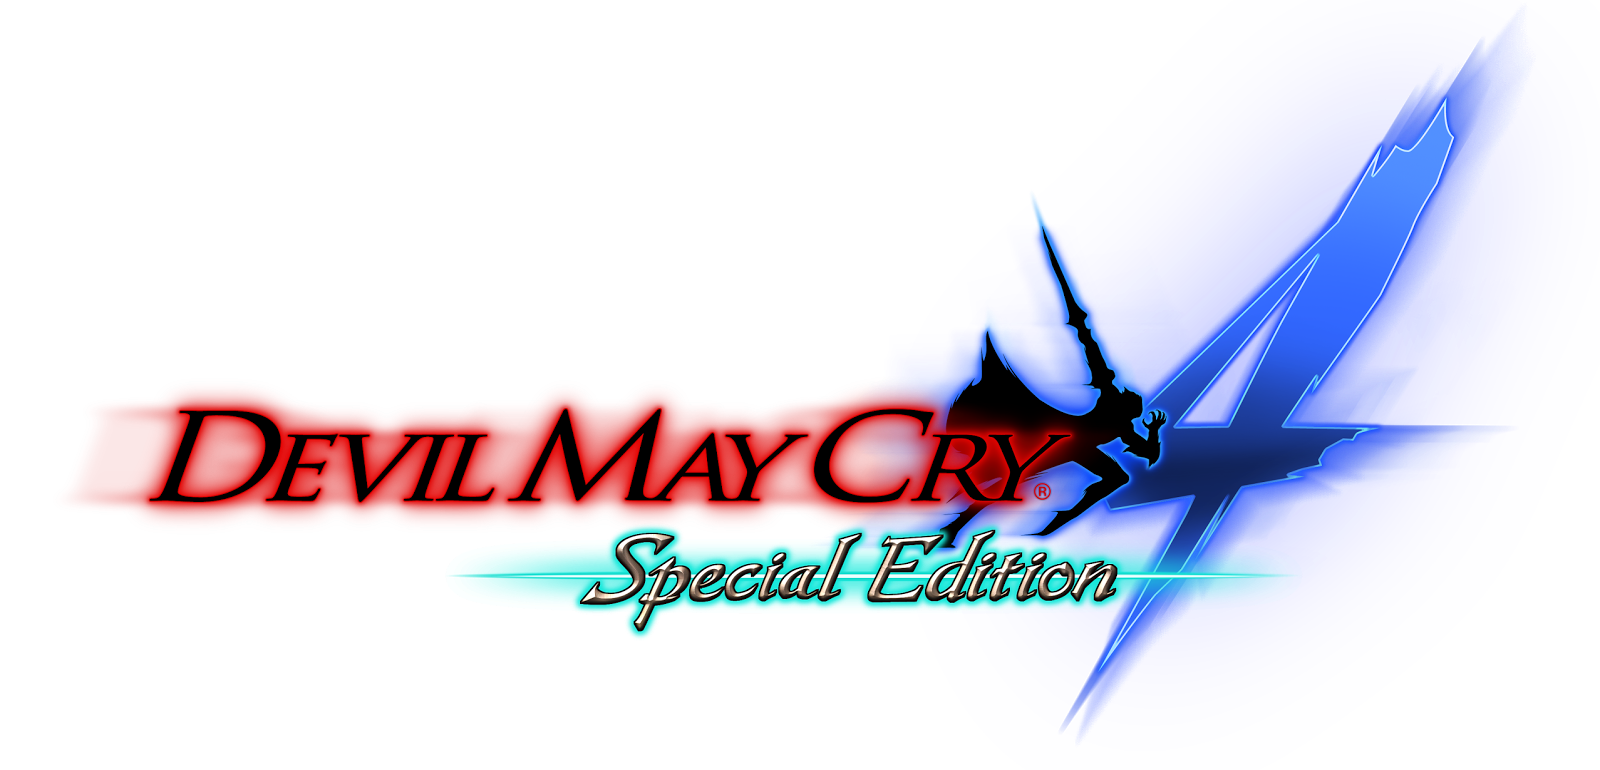  Devil May Cry 4 Collector's Edition -Xbox 360 : Devil May Cry 4,  Game: Video Games